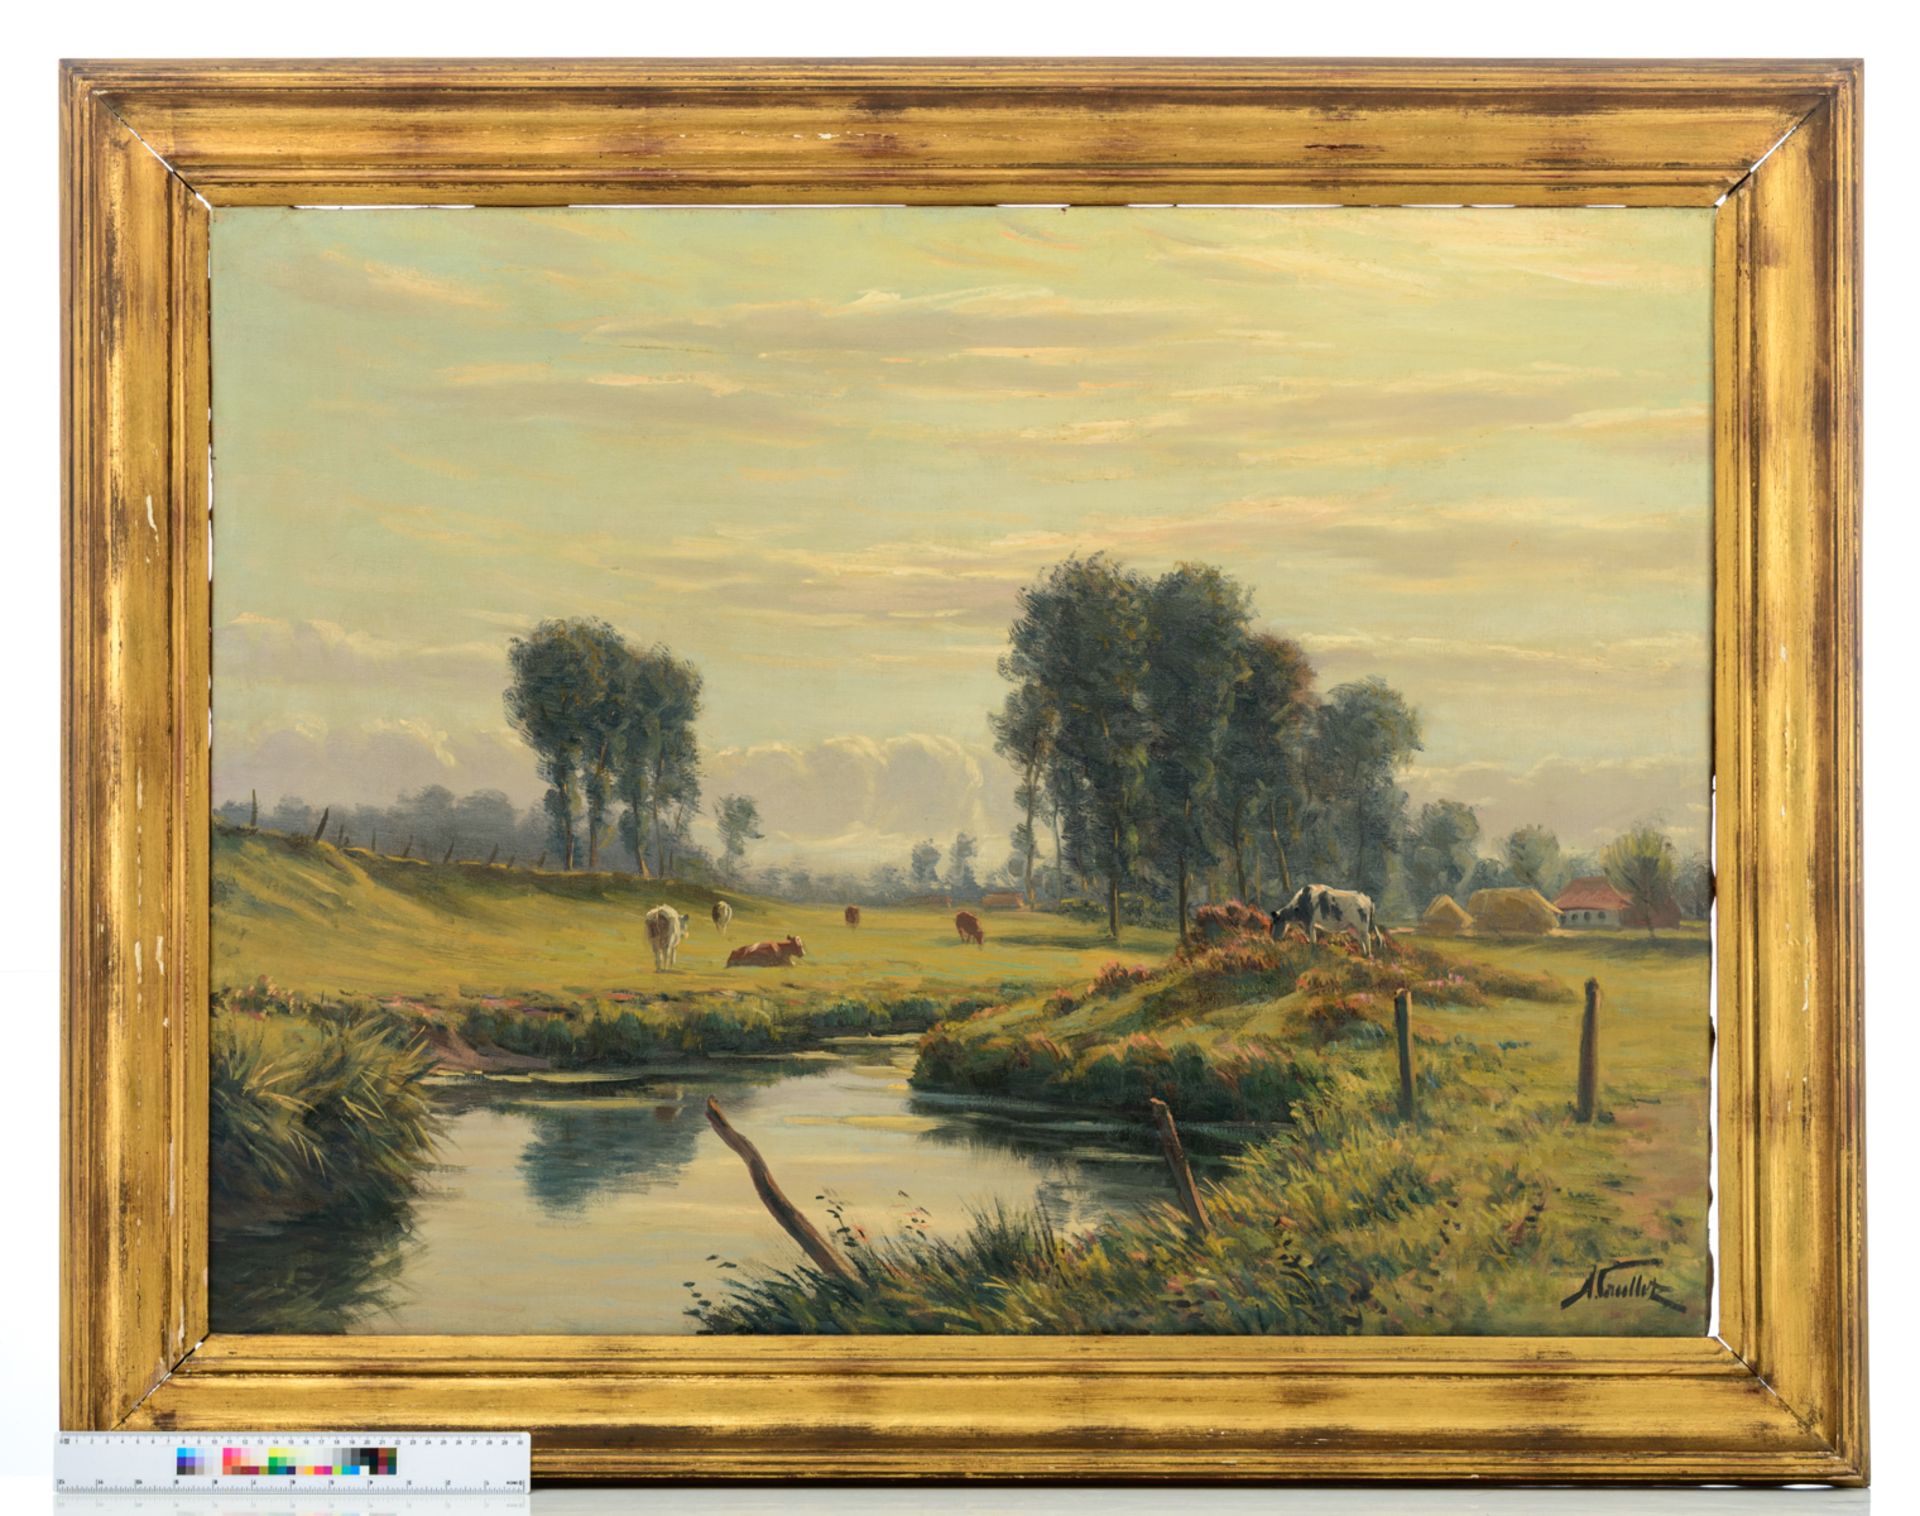 Caullet A., the cattle near the pond, oil on canvas, 75 x 100 cm - Image 5 of 5